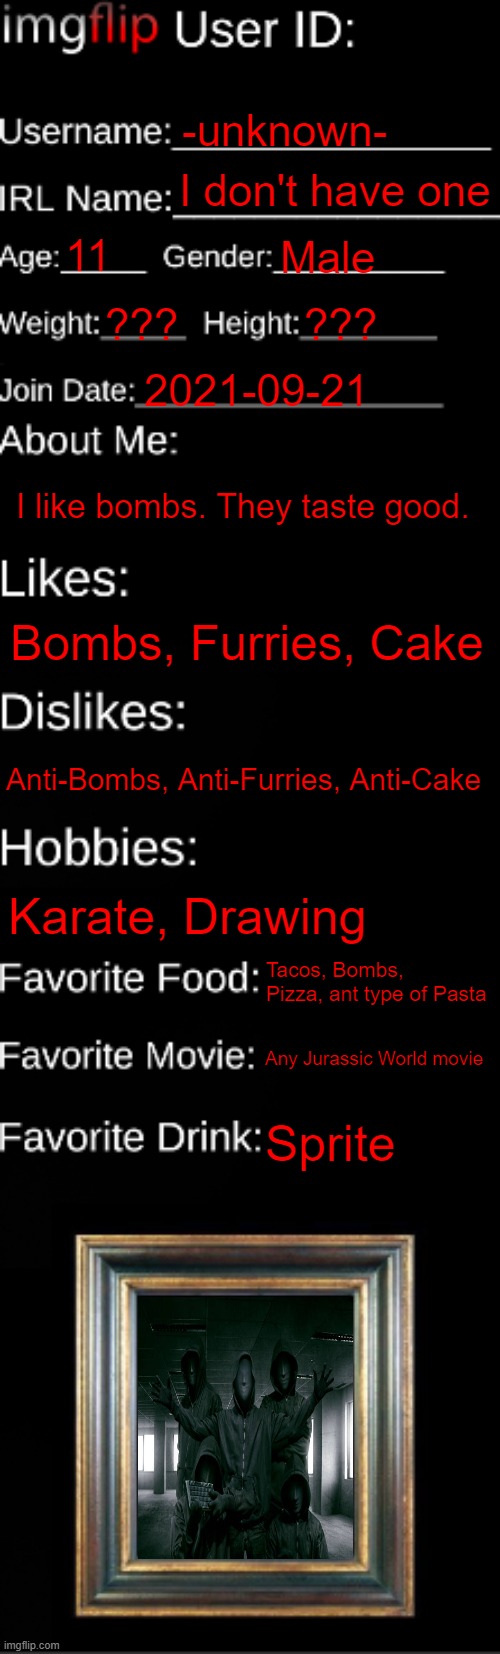 meh |  -unknown-; I don't have one; 11; Male; ??? ??? 2021-09-21; I like bombs. They taste good. Bombs, Furries, Cake; Anti-Bombs, Anti-Furries, Anti-Cake; Karate, Drawing; Tacos, Bombs, Pizza, ant type of Pasta; Any Jurassic World movie; Sprite | image tagged in imgflip id card | made w/ Imgflip meme maker